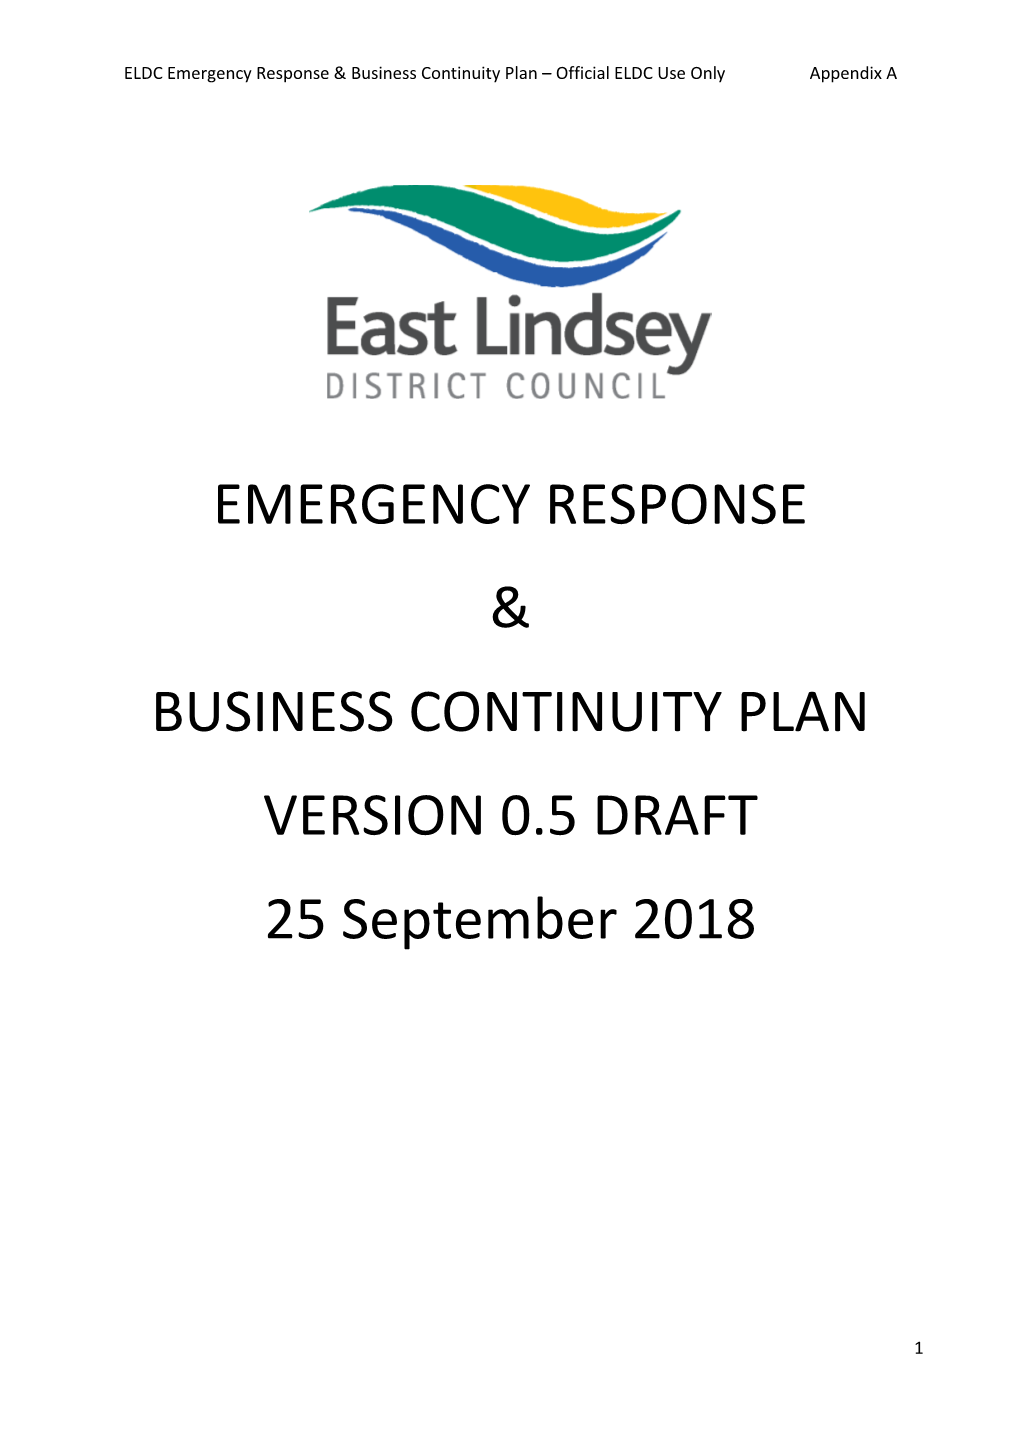 ELDC Emergency Response and Business Continuity Plan V0.5